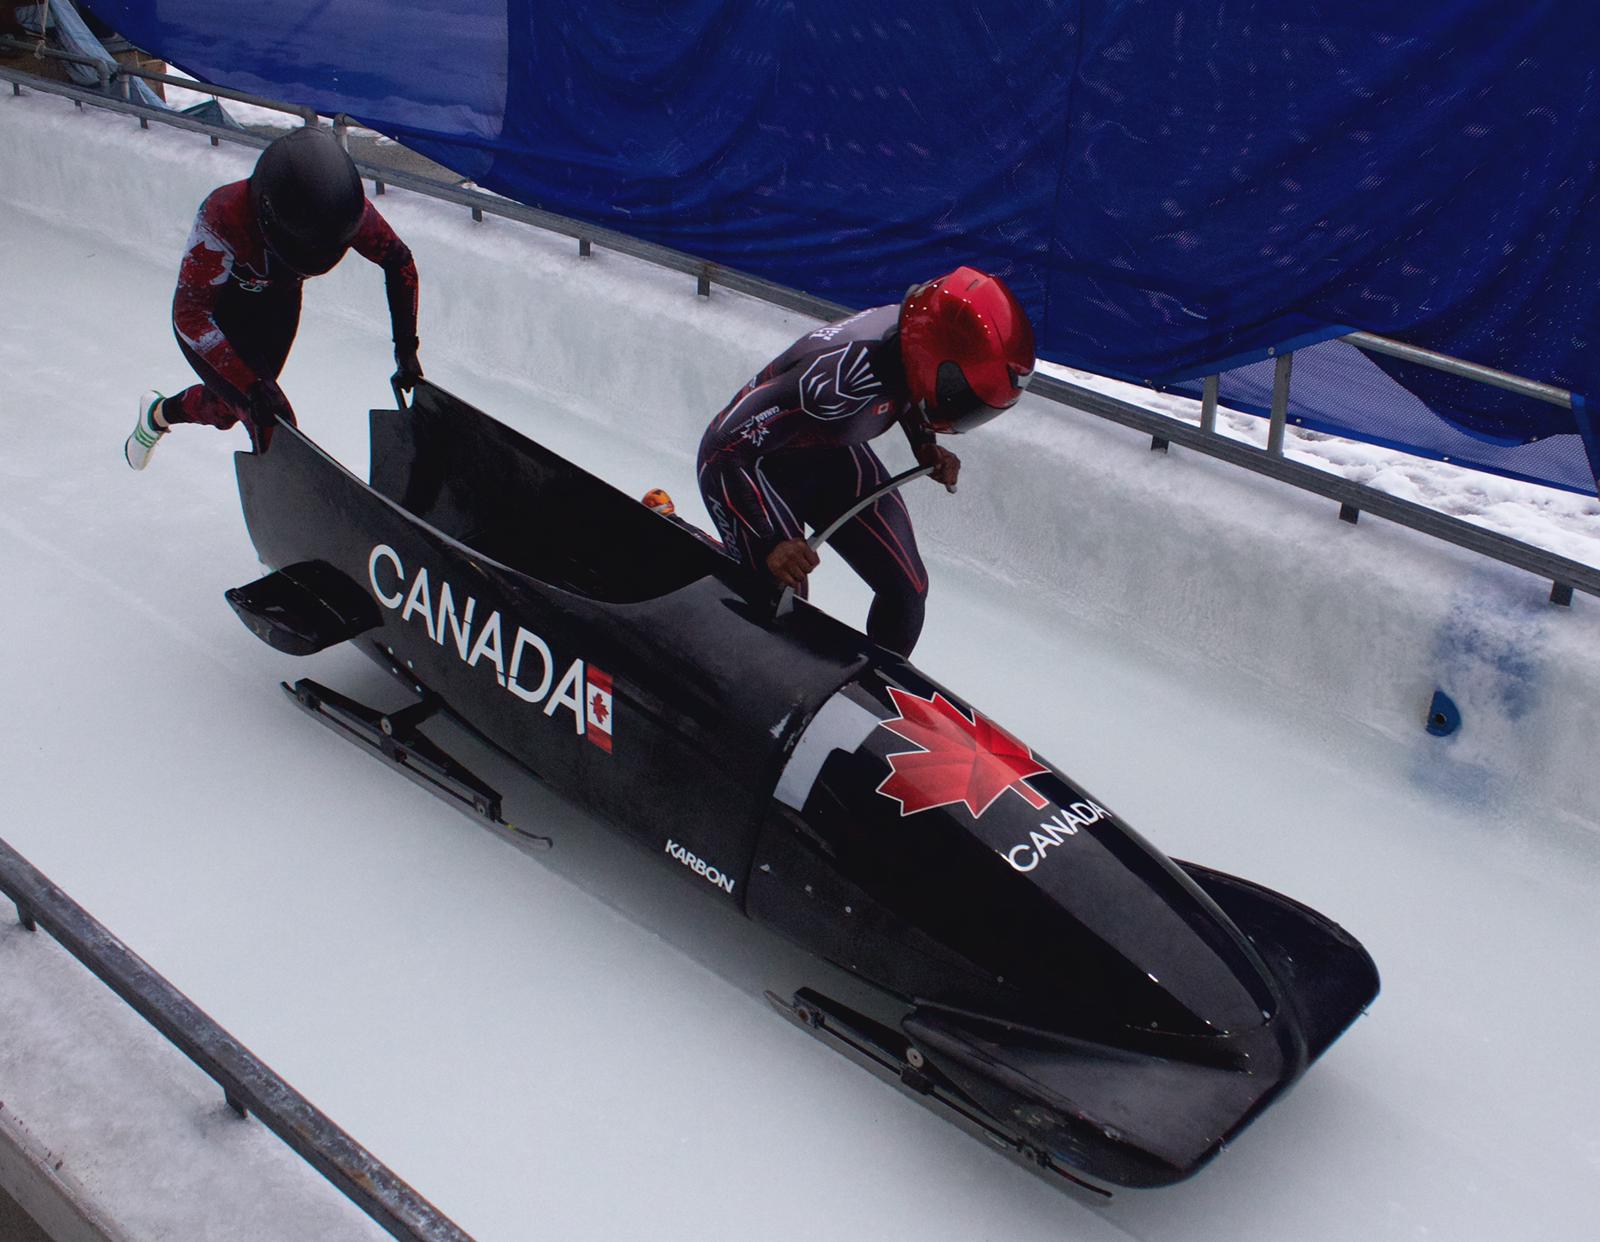 Two bobsledders push a sled at the start of a run 